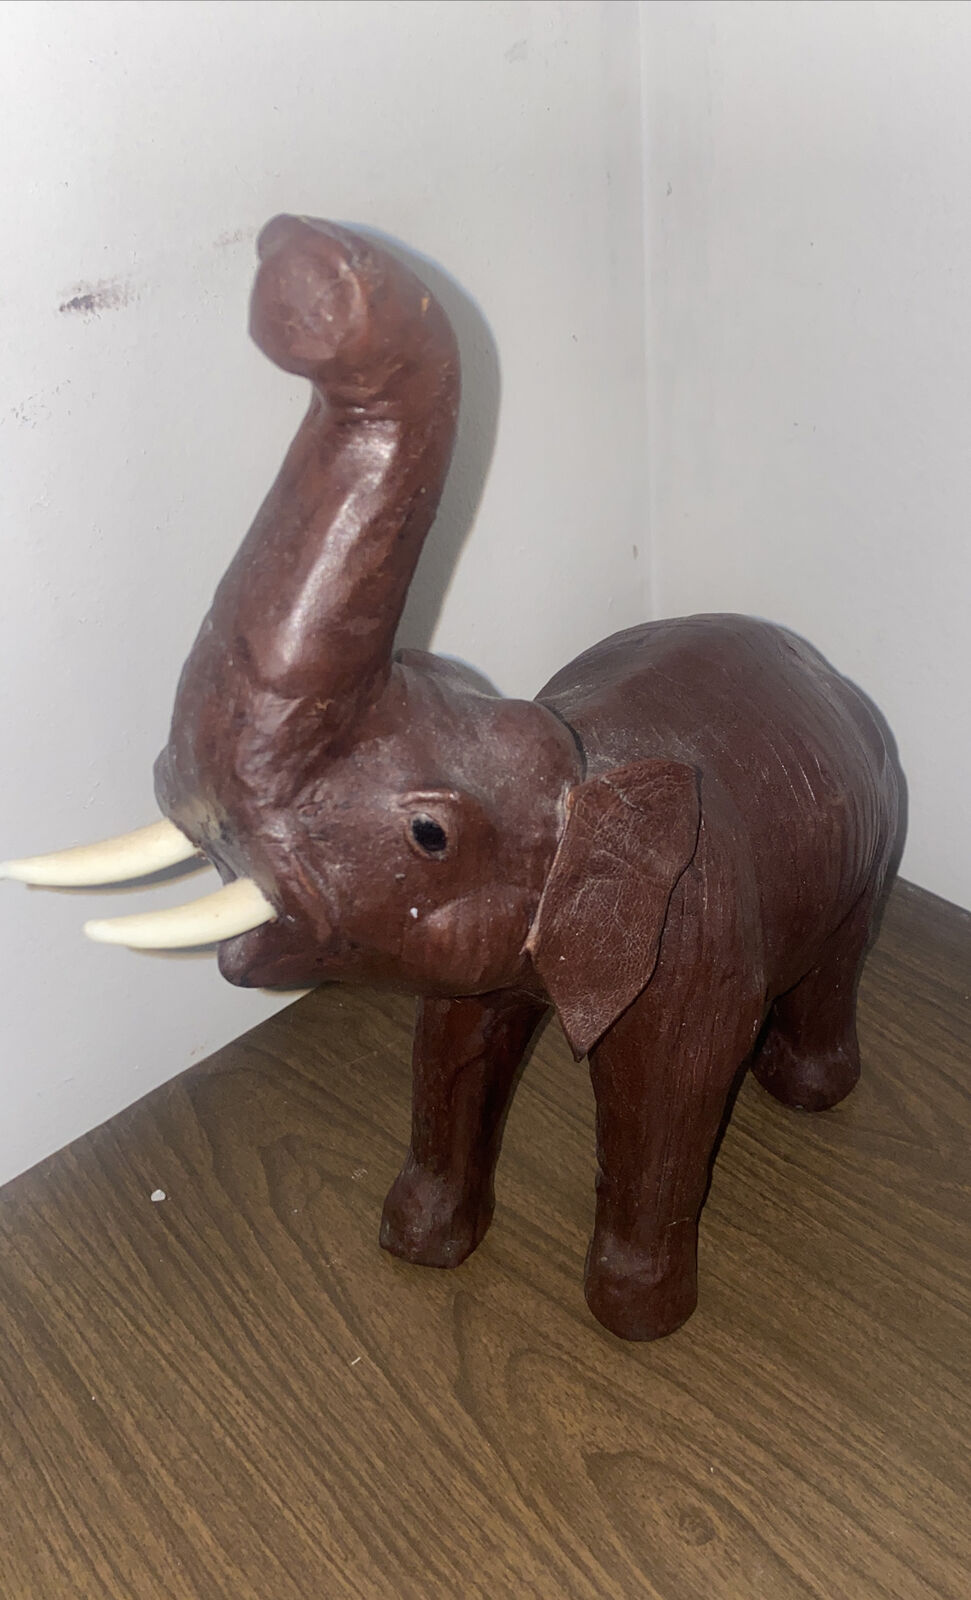 VTG Brown Leather Elephant Sculpture Figurine 12in Tall Distinct Display Decor